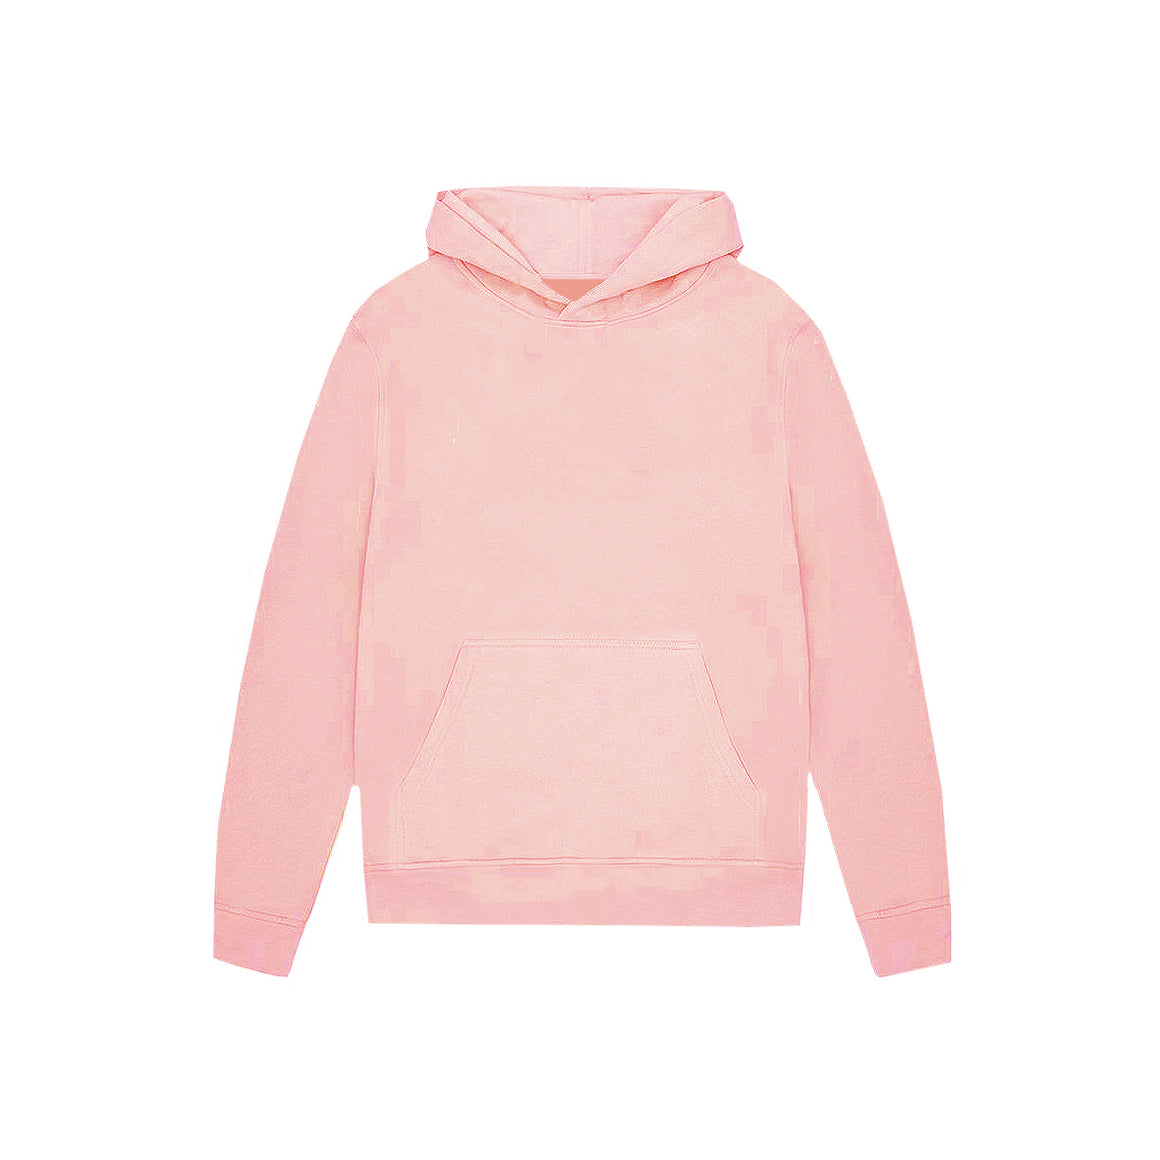 54 FLORAL PREMIUM PULLOVER HOODY - DUSTY PINK